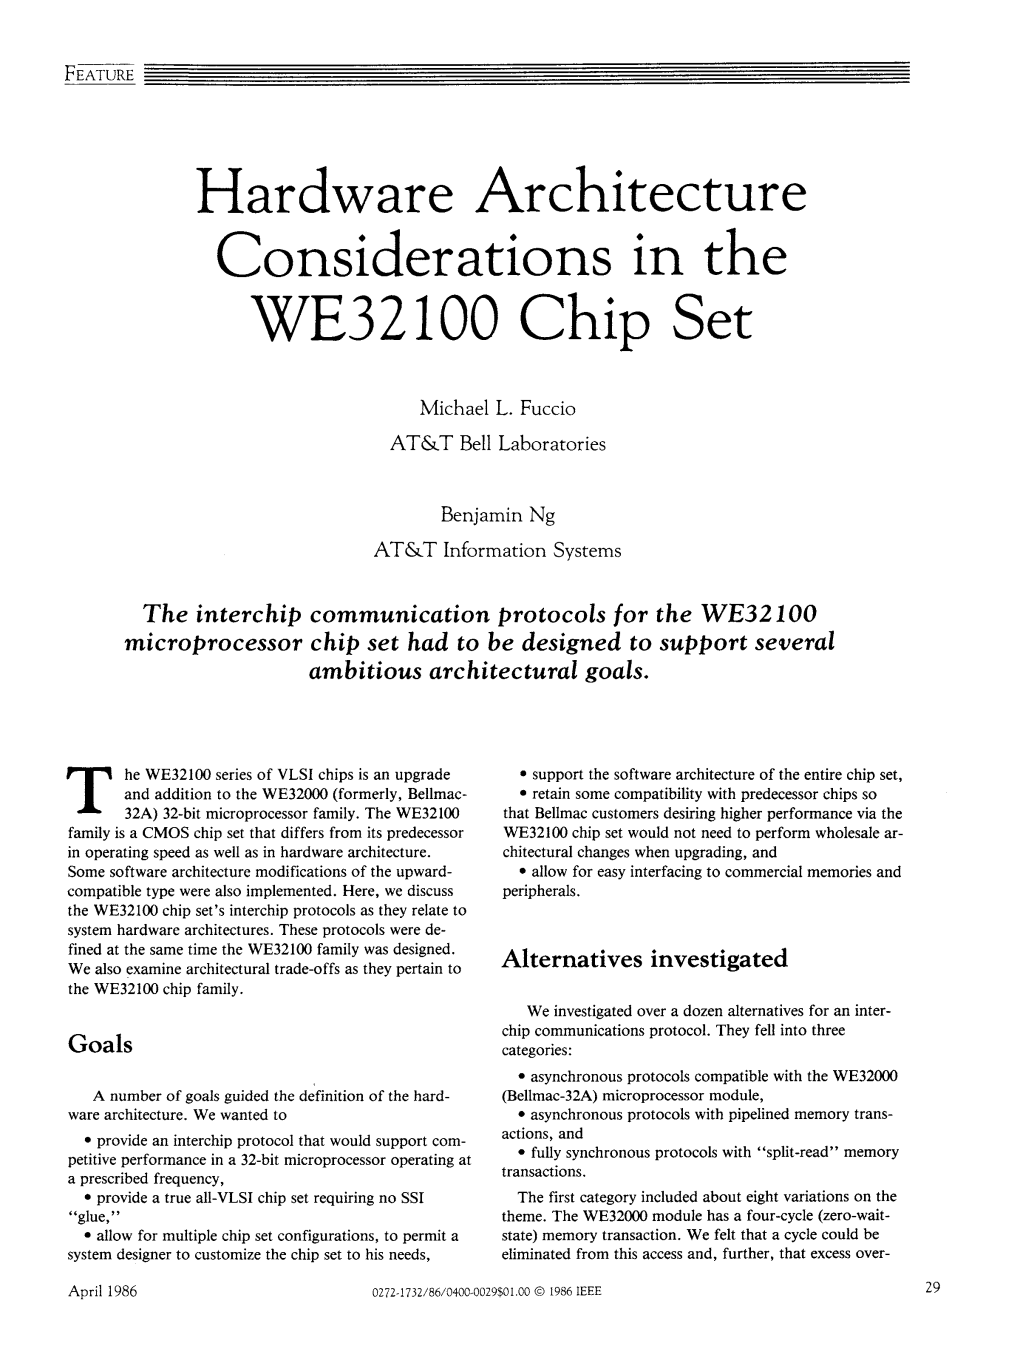 Hardware Architecture Considerations in the WE32100 Chip Set